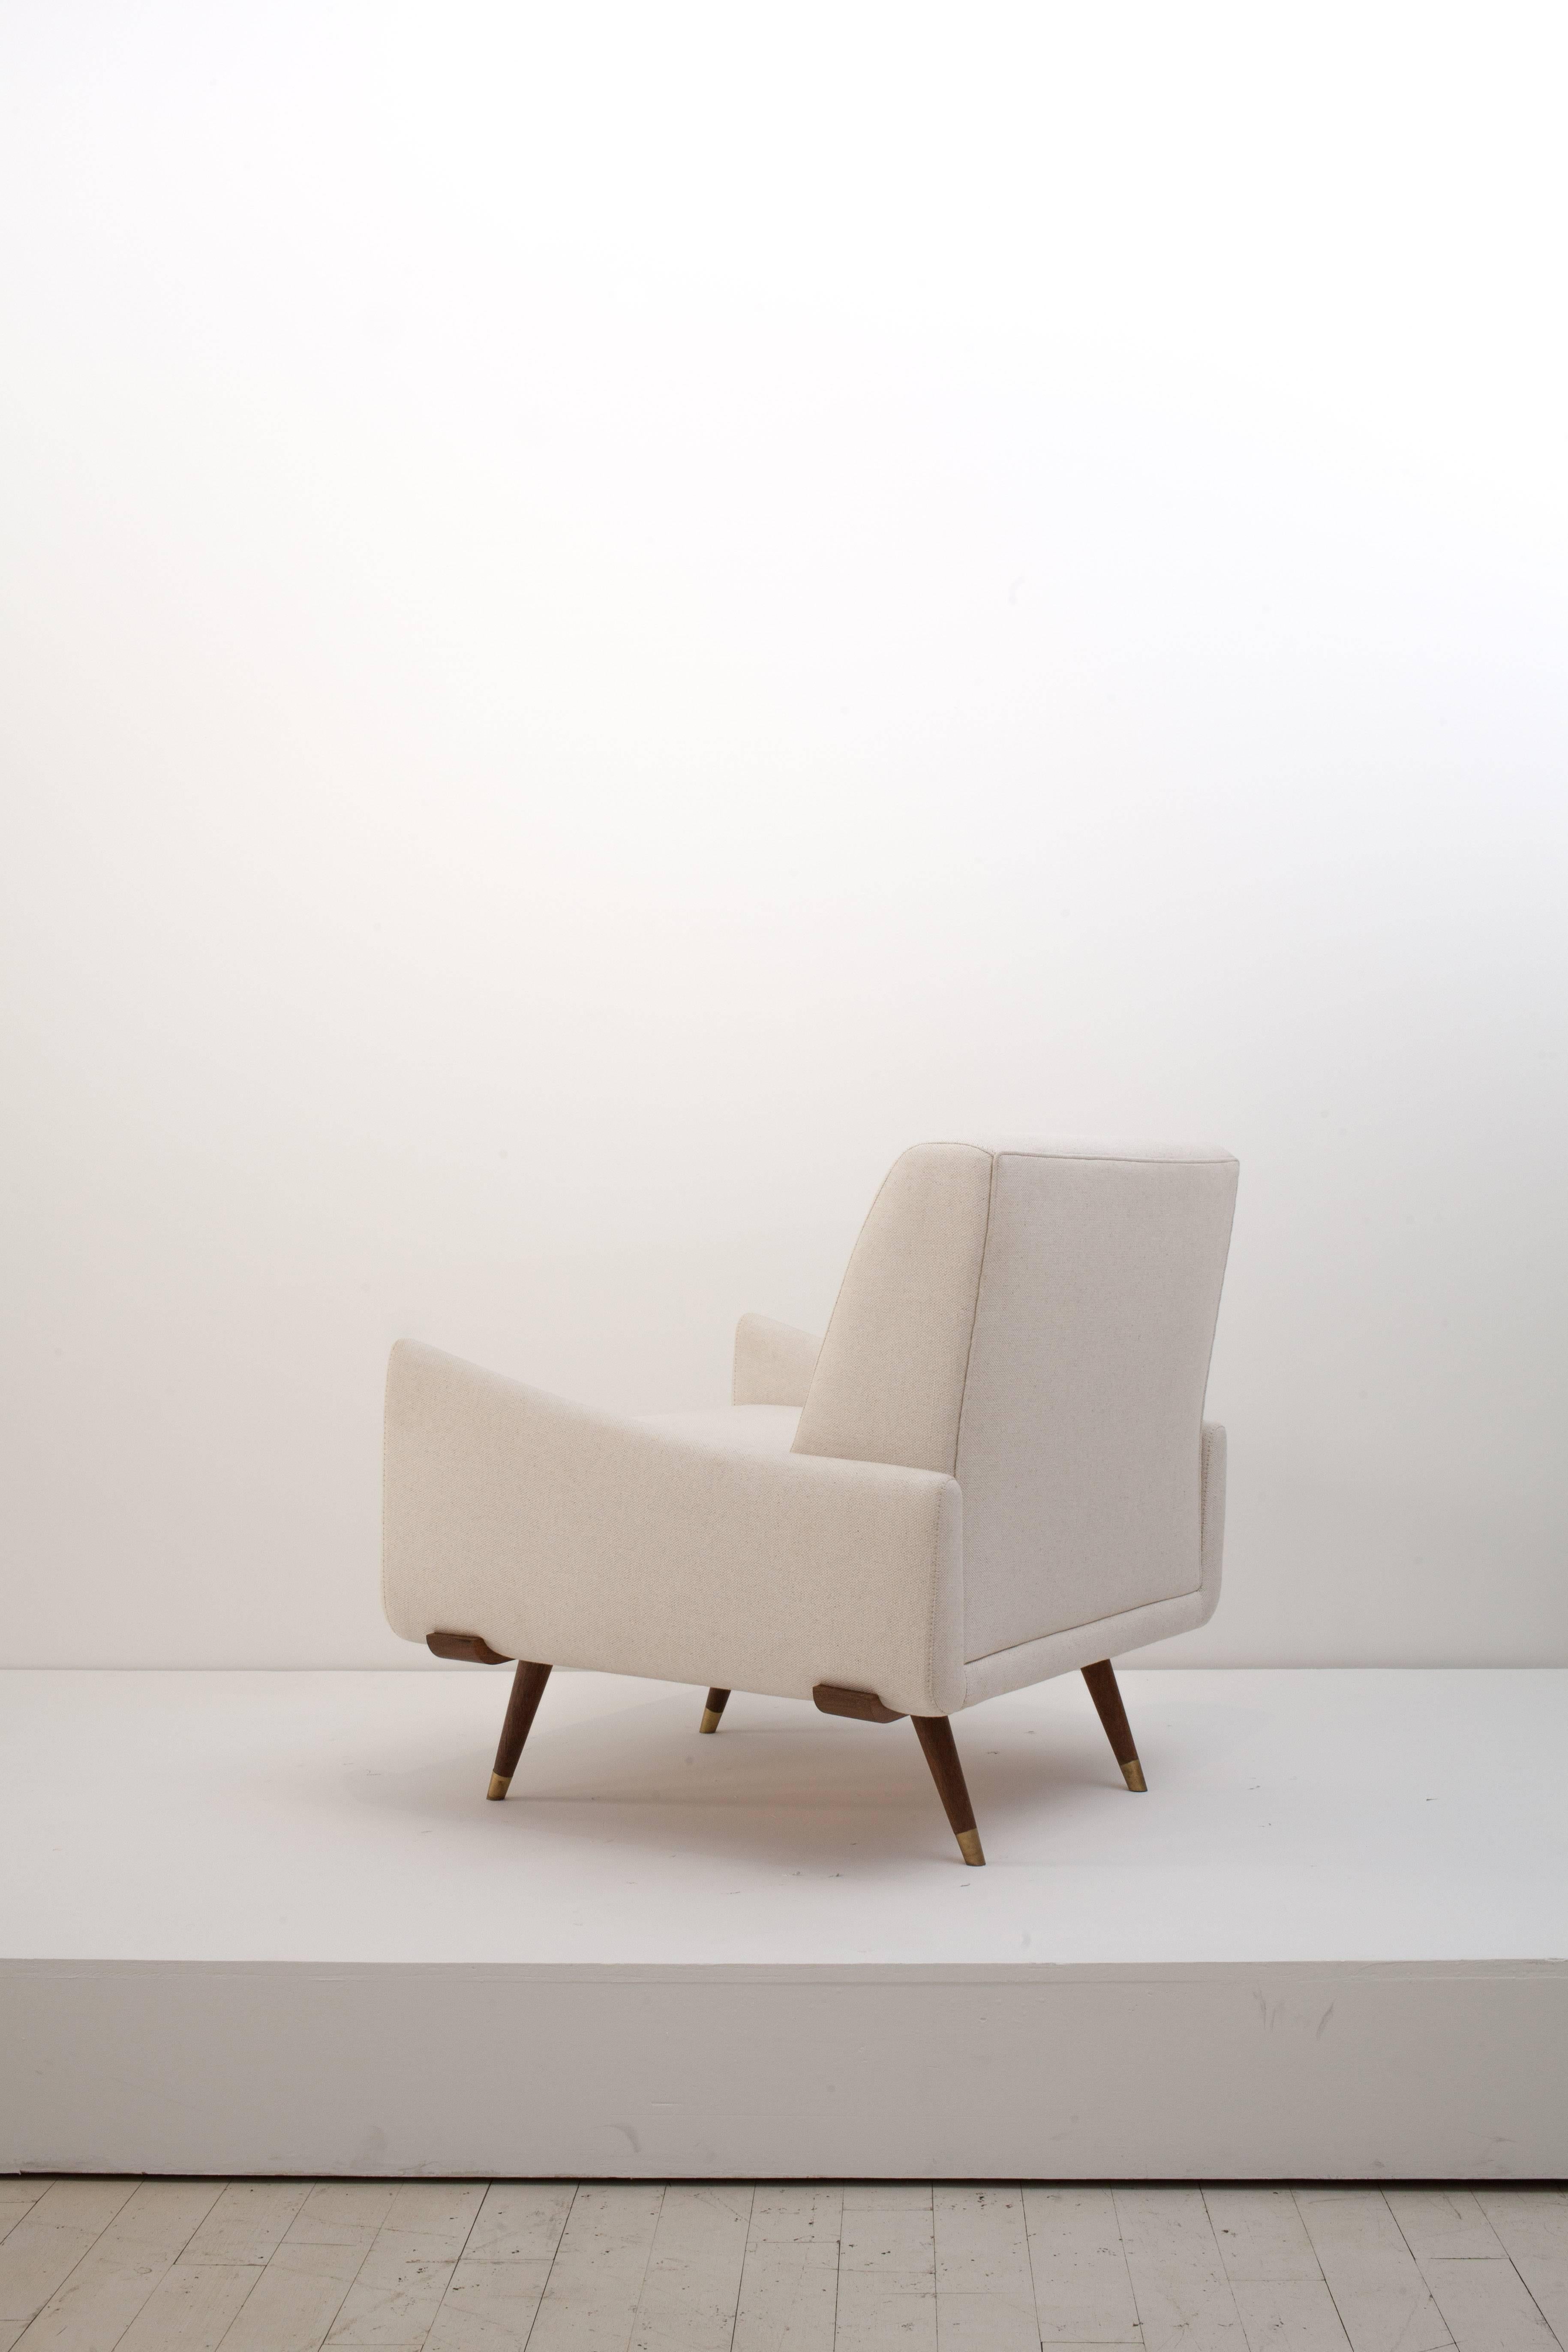 PO-801 Armchair by Jorge Zalszupin In Excellent Condition For Sale In New York, NY